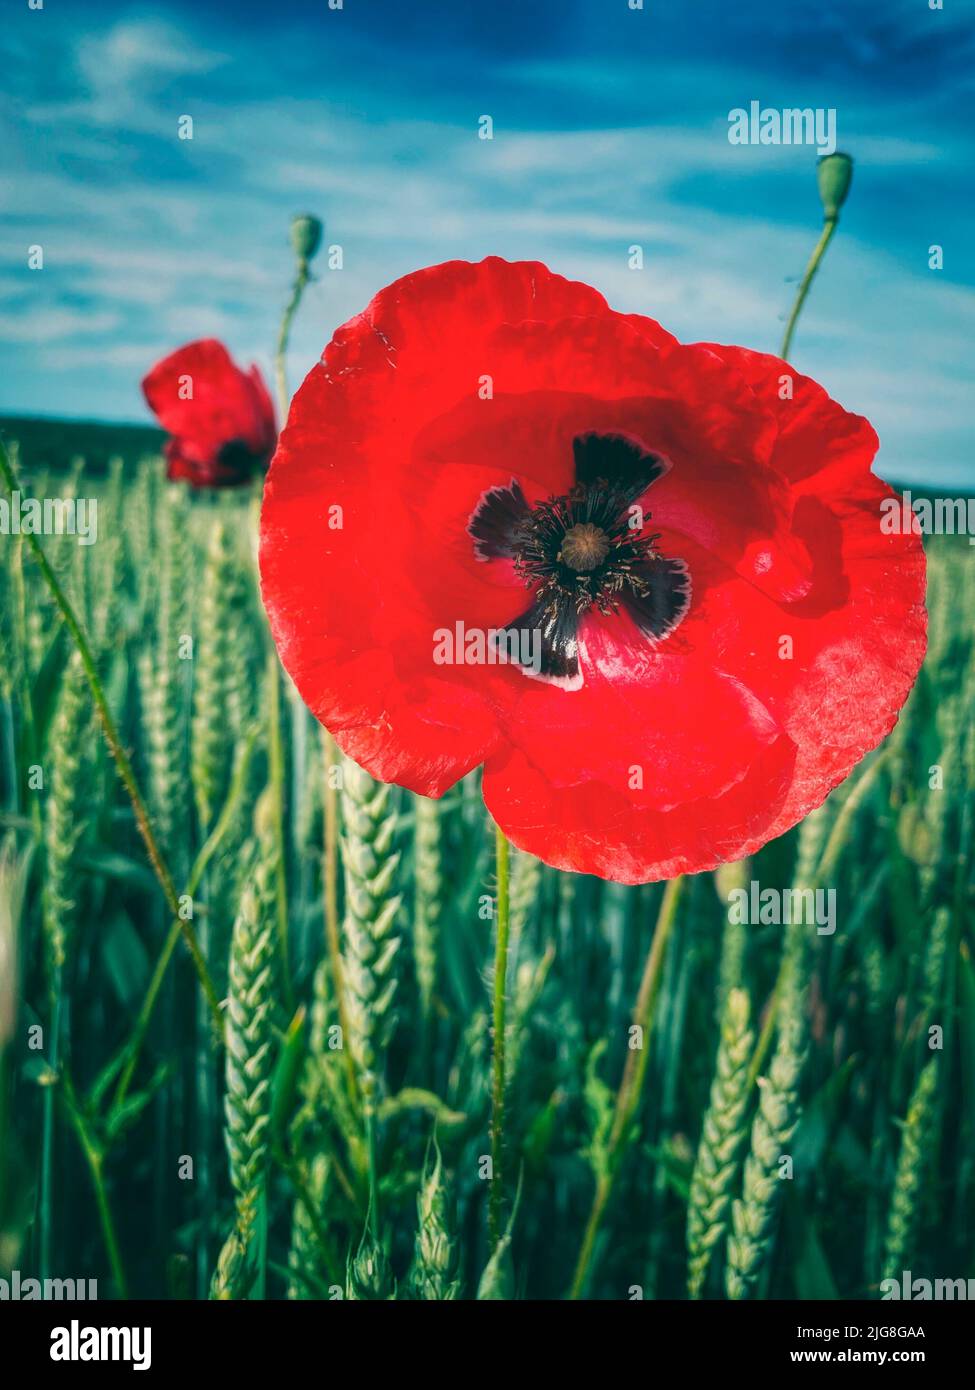 Poppies in wheat field Banque D'Images